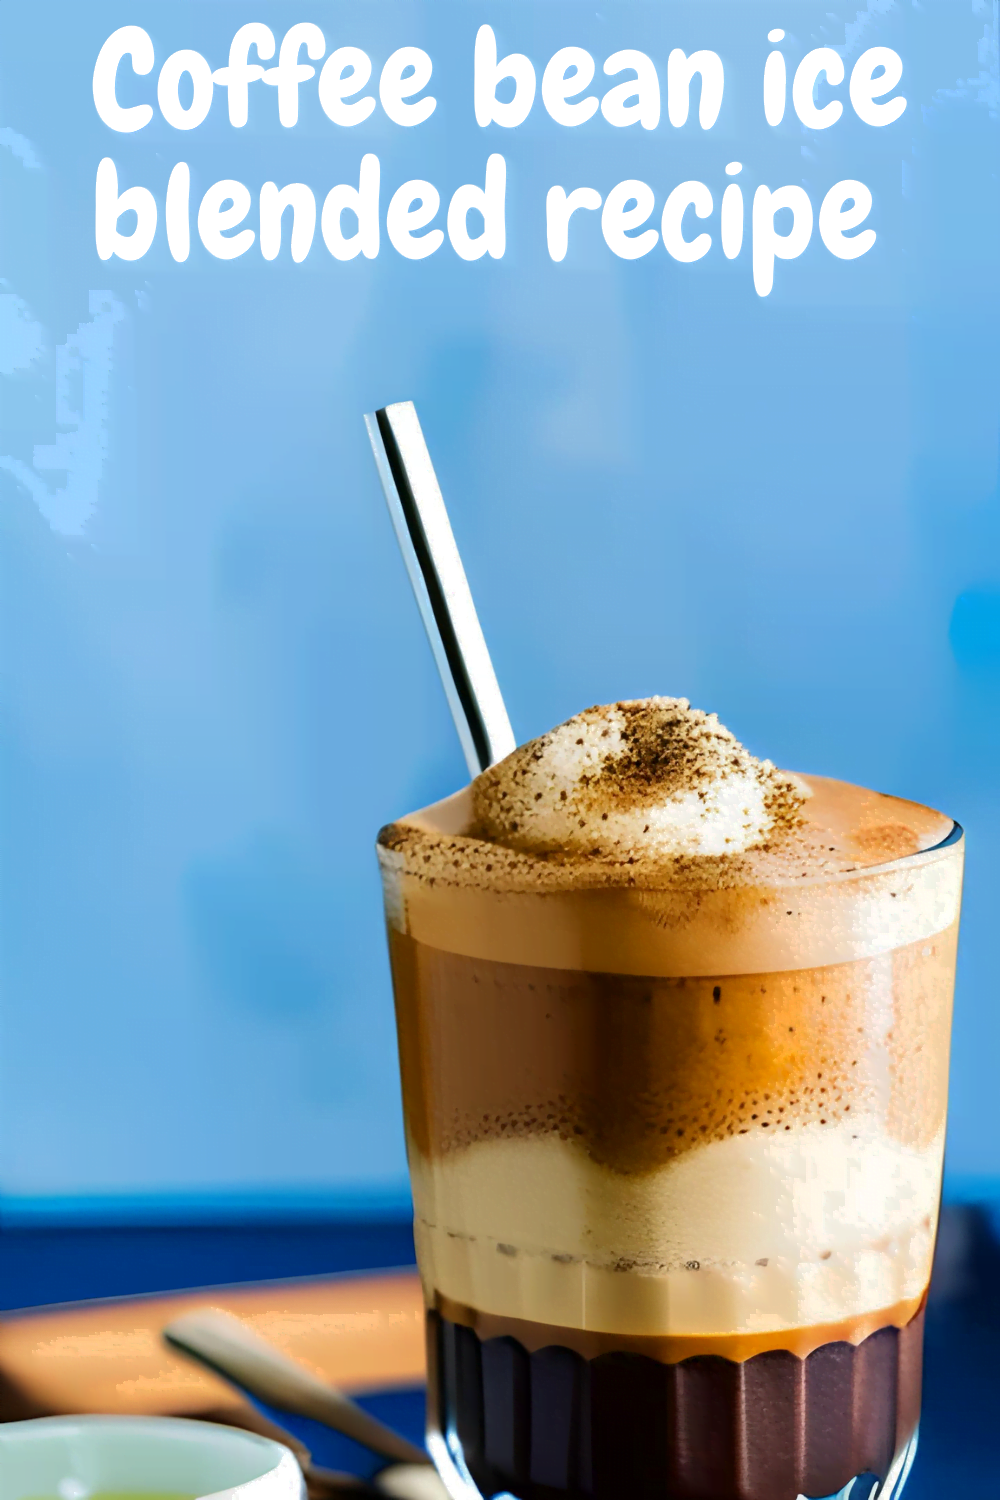 Coffee bean ice blended recipe : Refreshing Anytime of Day!